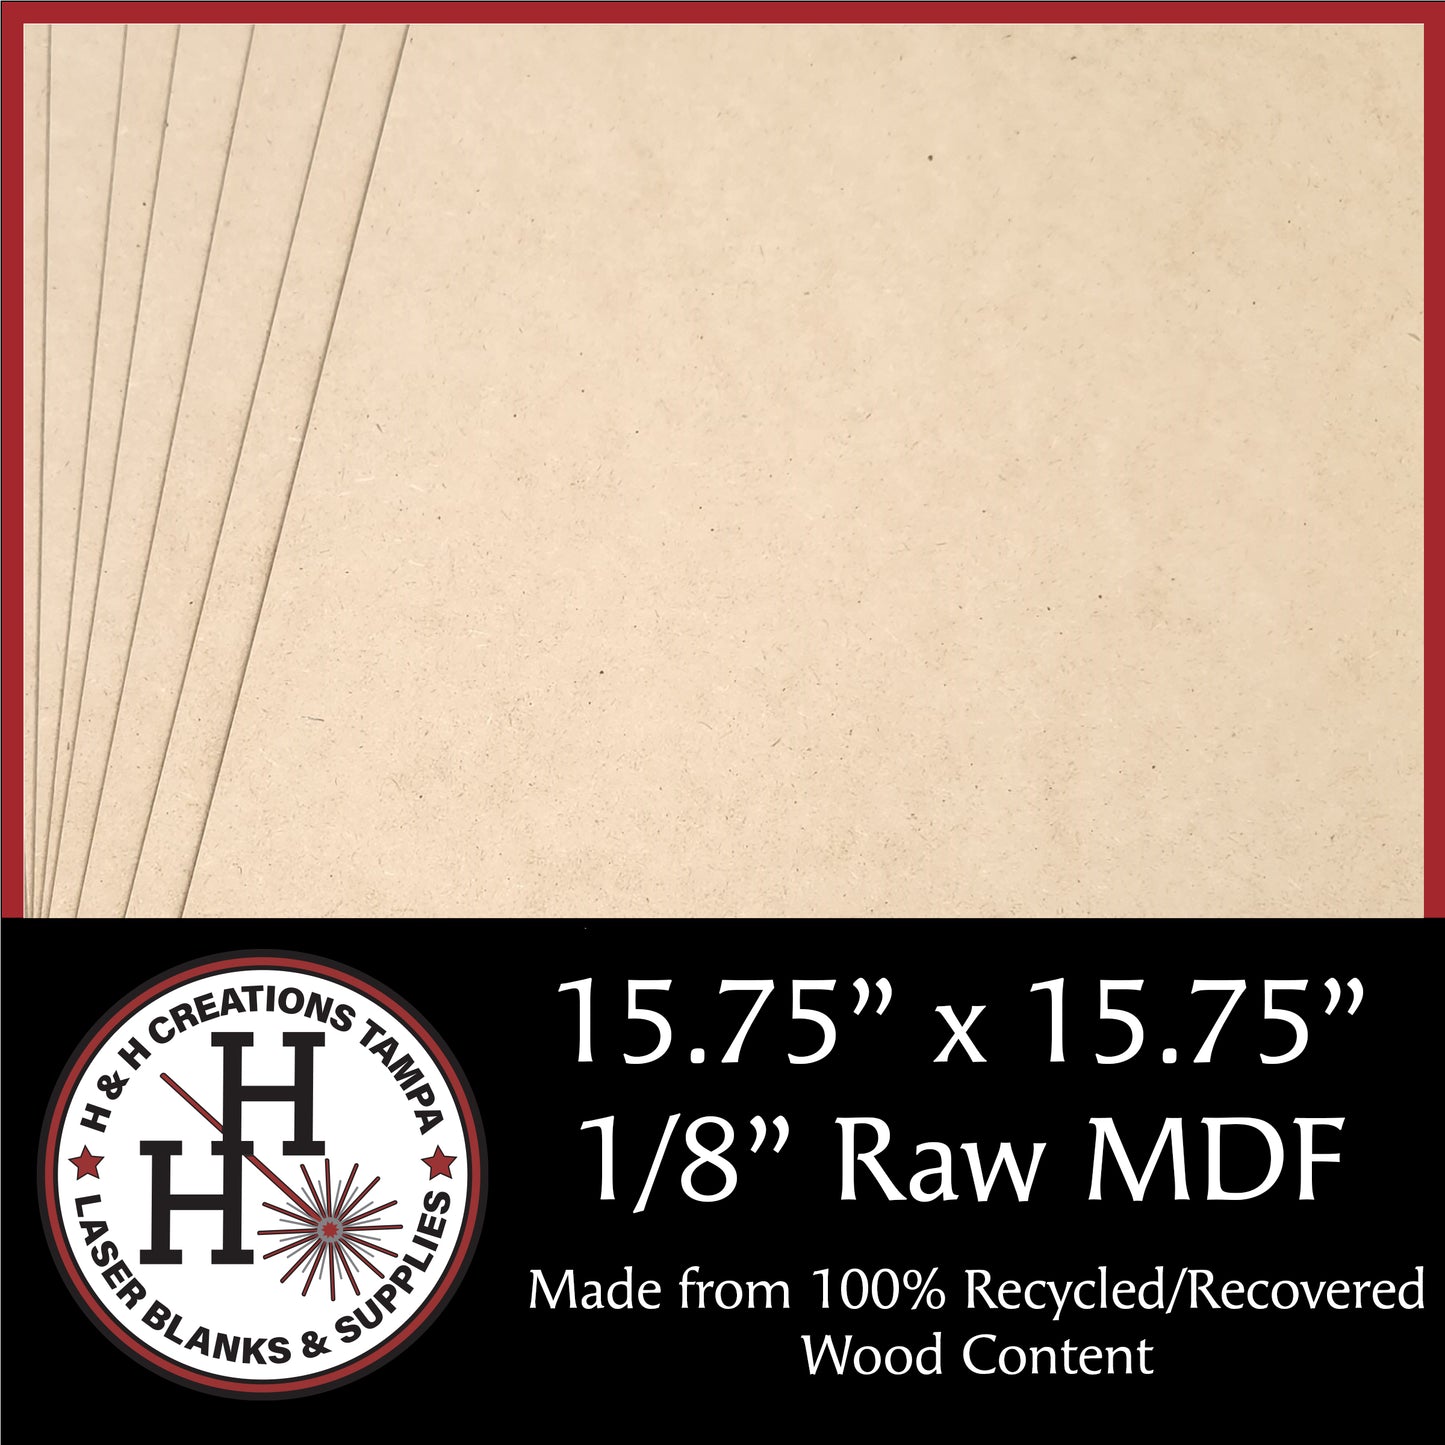 LOCAL PICK UP ONLY - 1/8" Raw Premium MDF Draft Board - Without Slick Finish – 15.75" x 15.75"